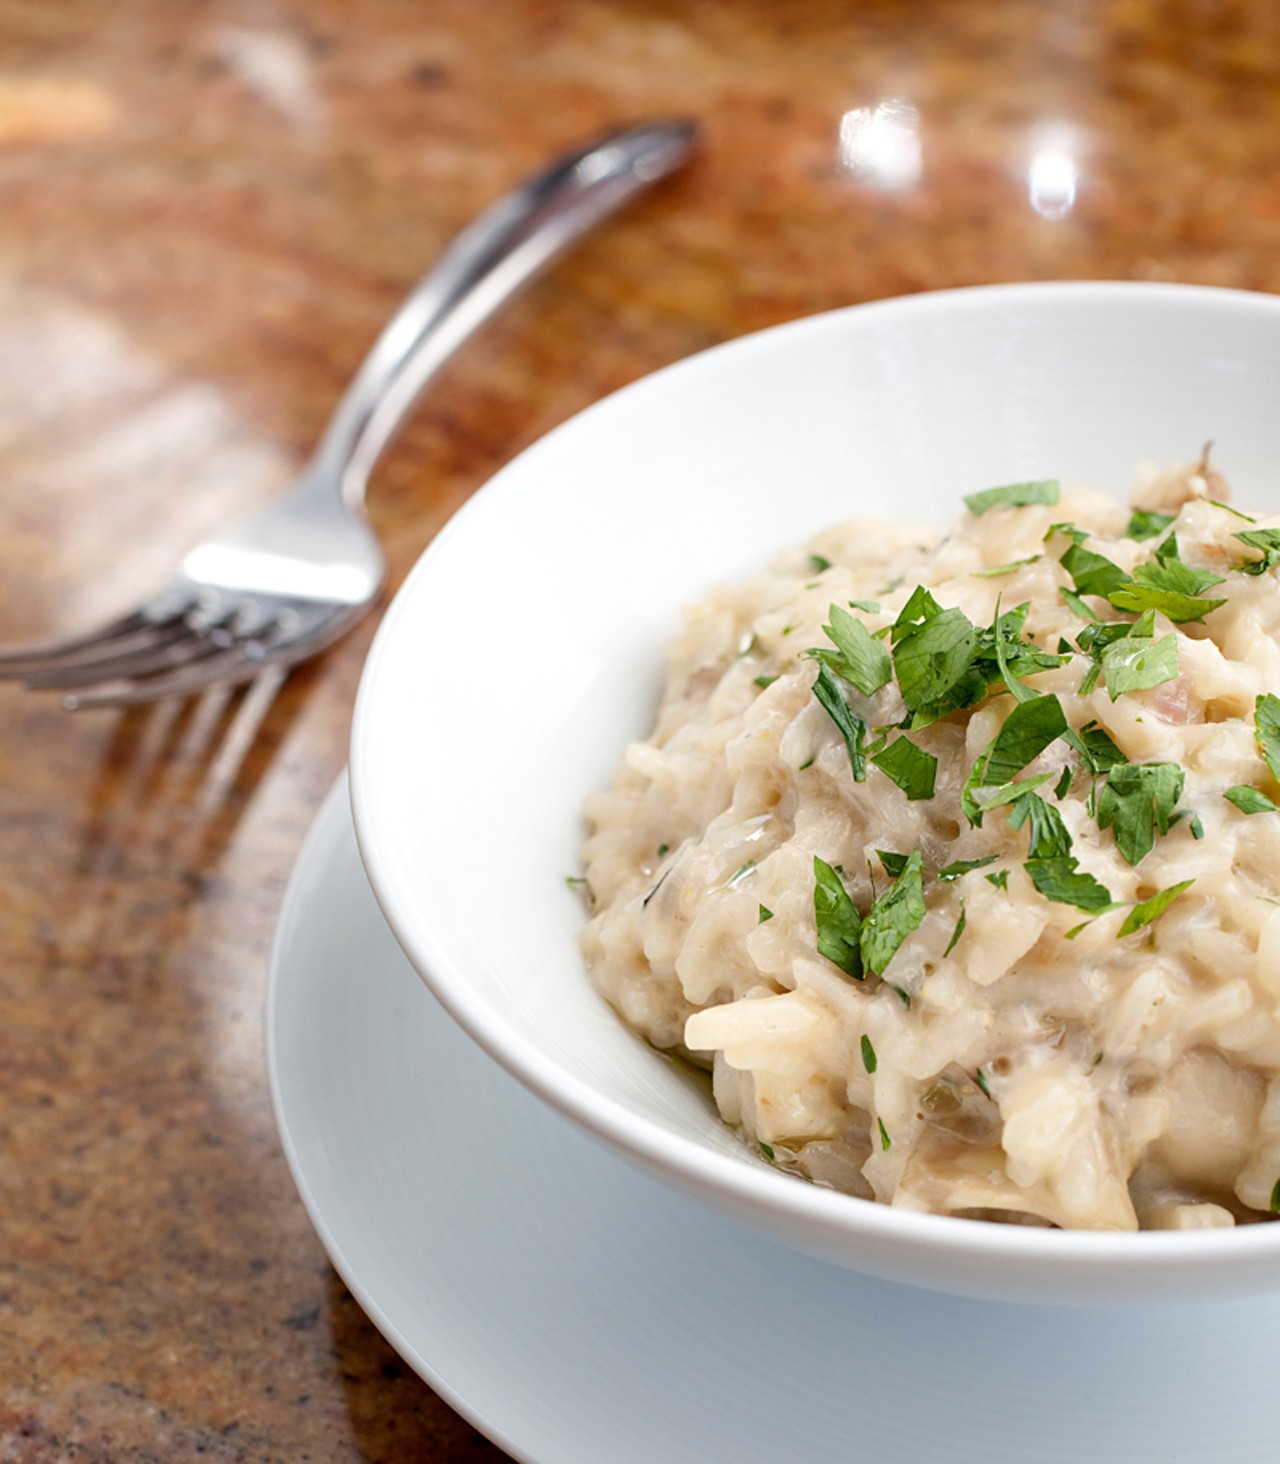 Wild mushroom risotto with mascarpone, parmesan cheese and herbs finished with truffle oil.